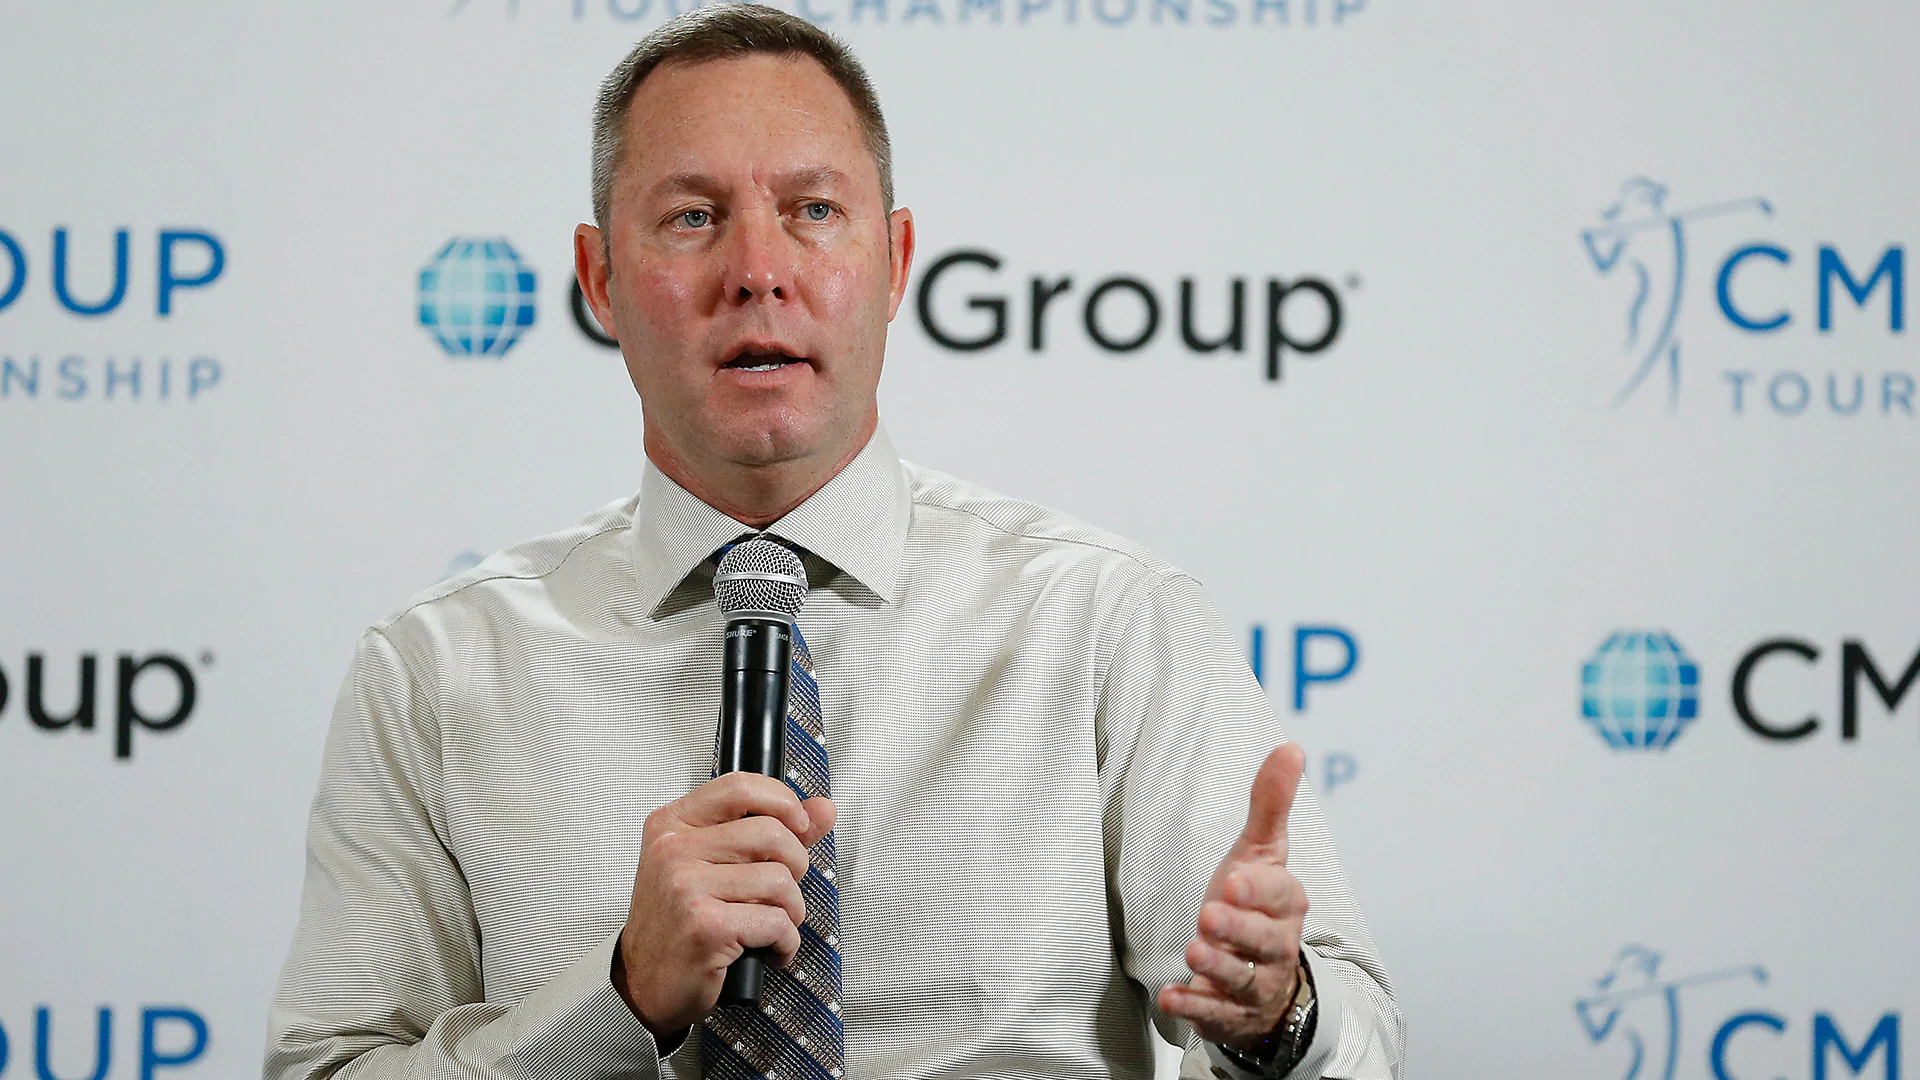 Mike Whan: Resuming LPGA competition is a responsibility, not a race